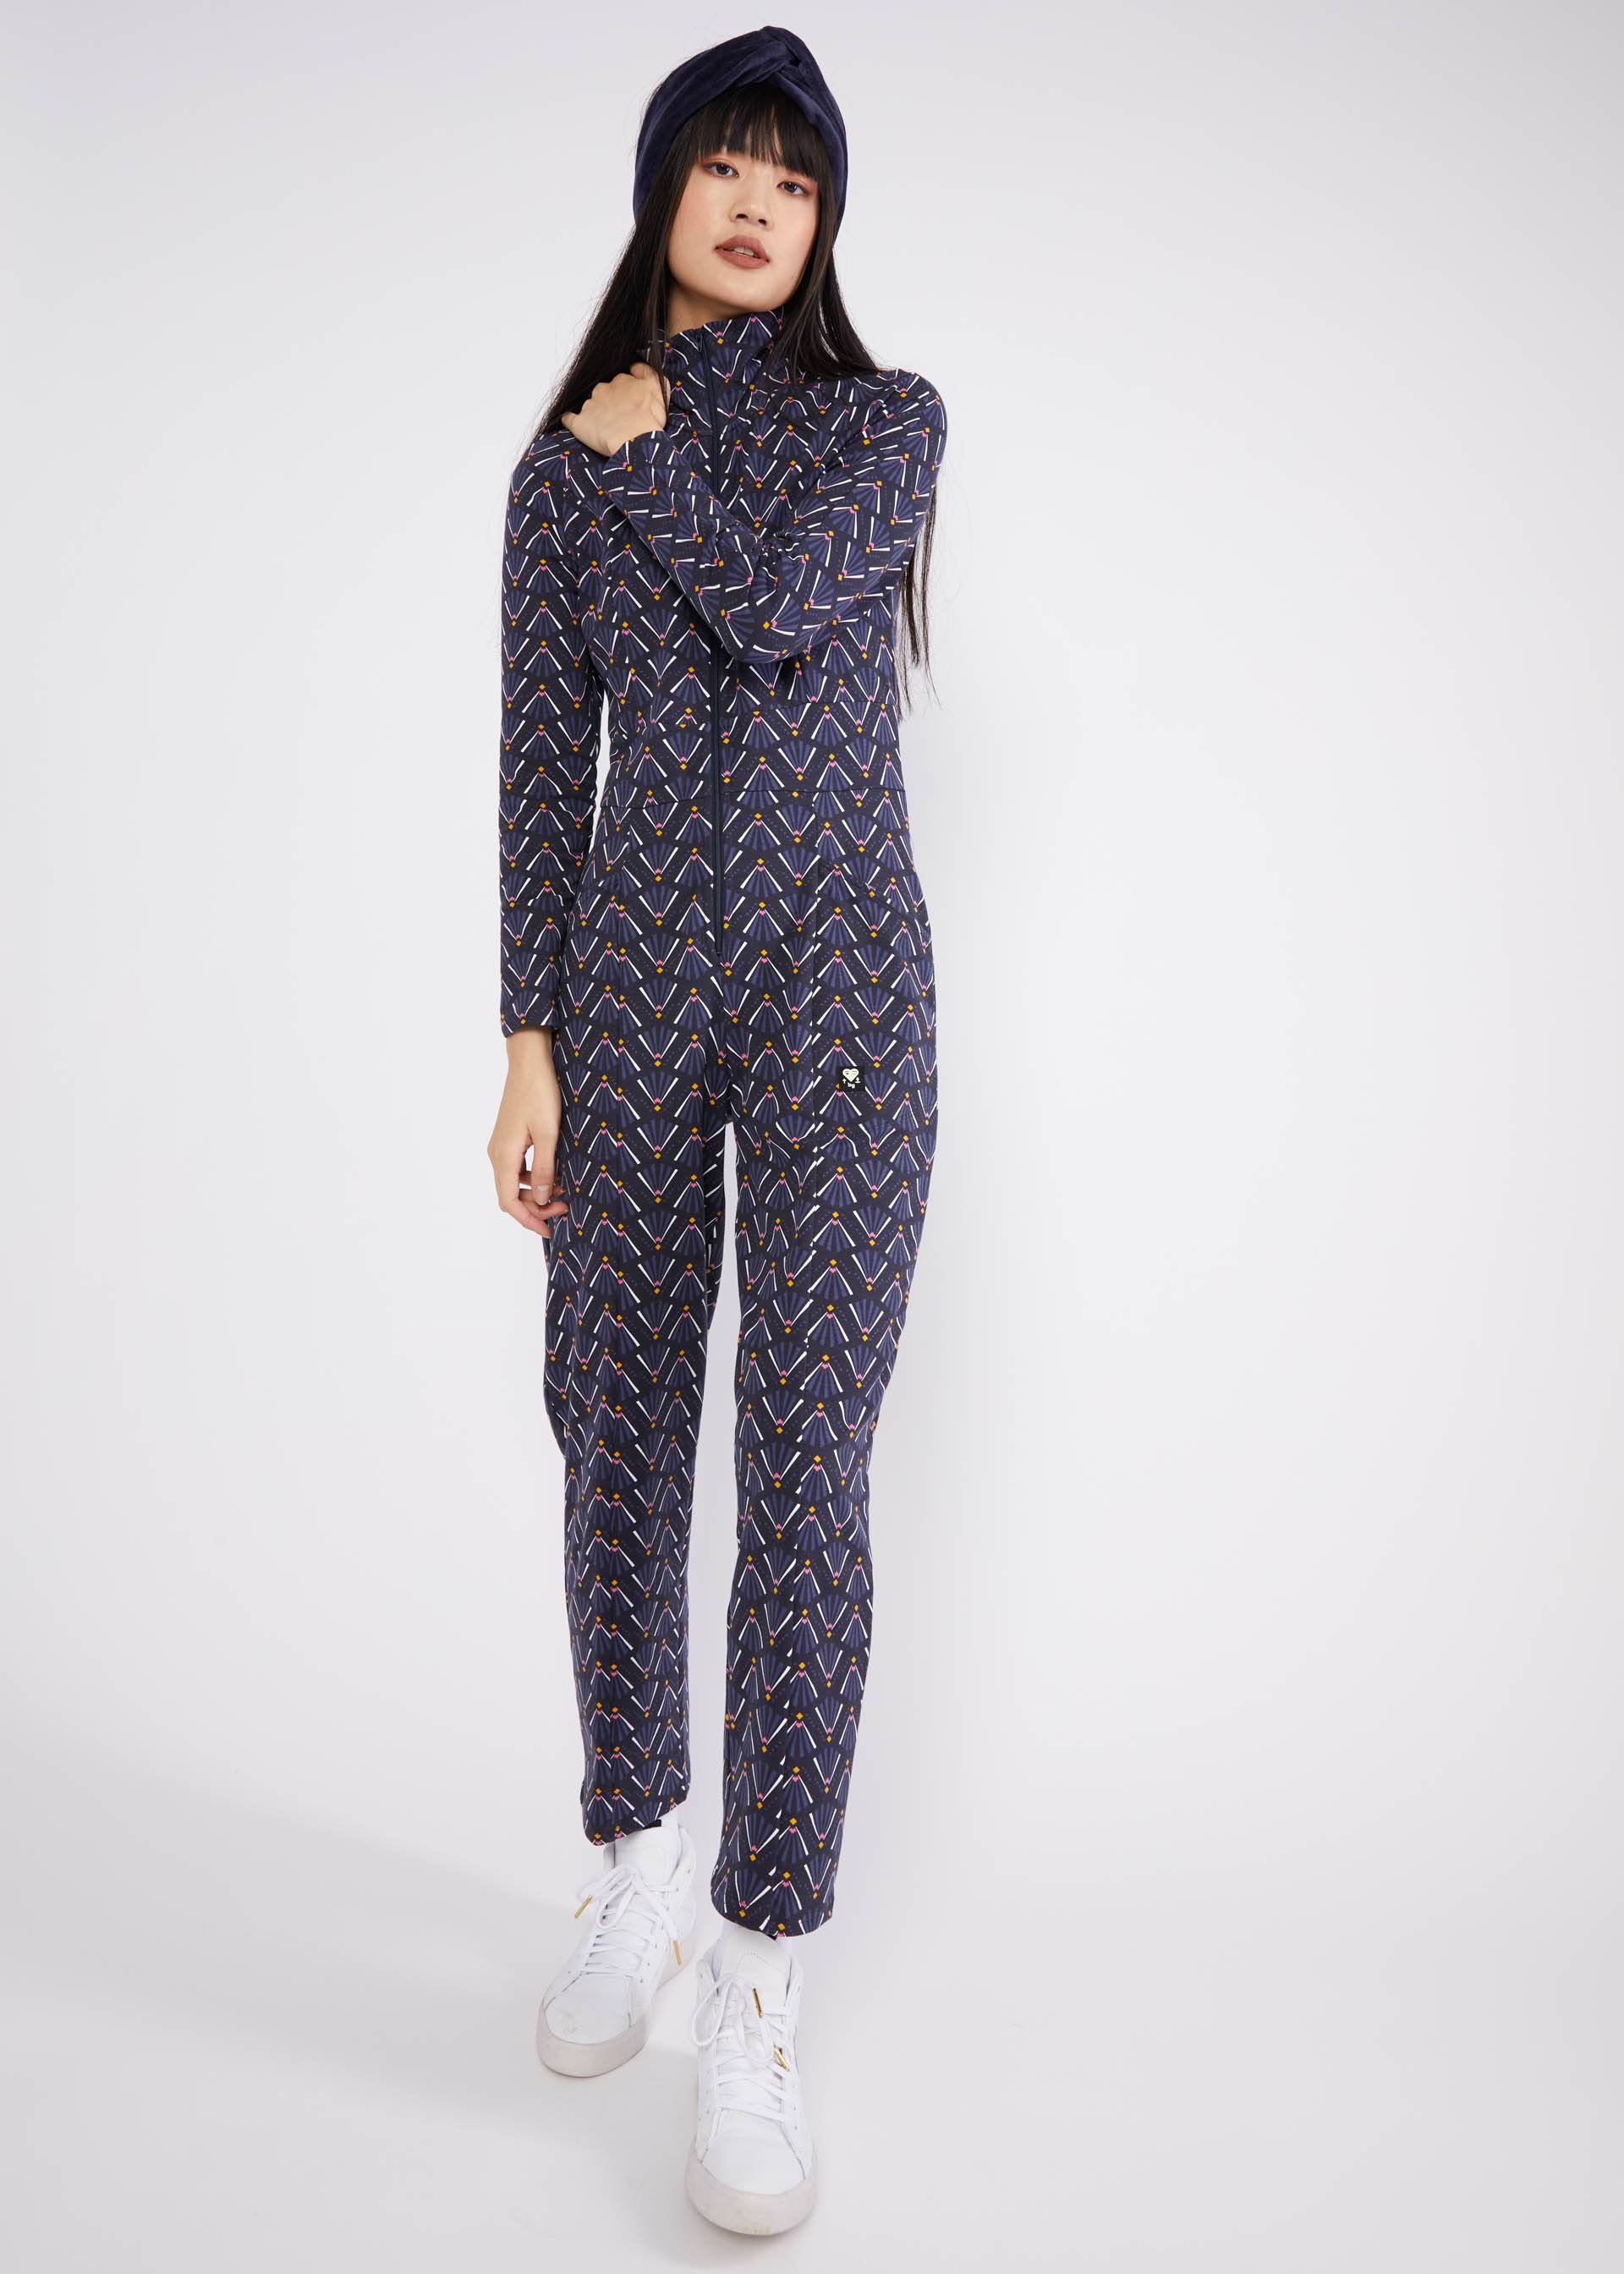 Jumpsuit Moonstruck Astronaut, great wide somewhere, Trousers, Blue